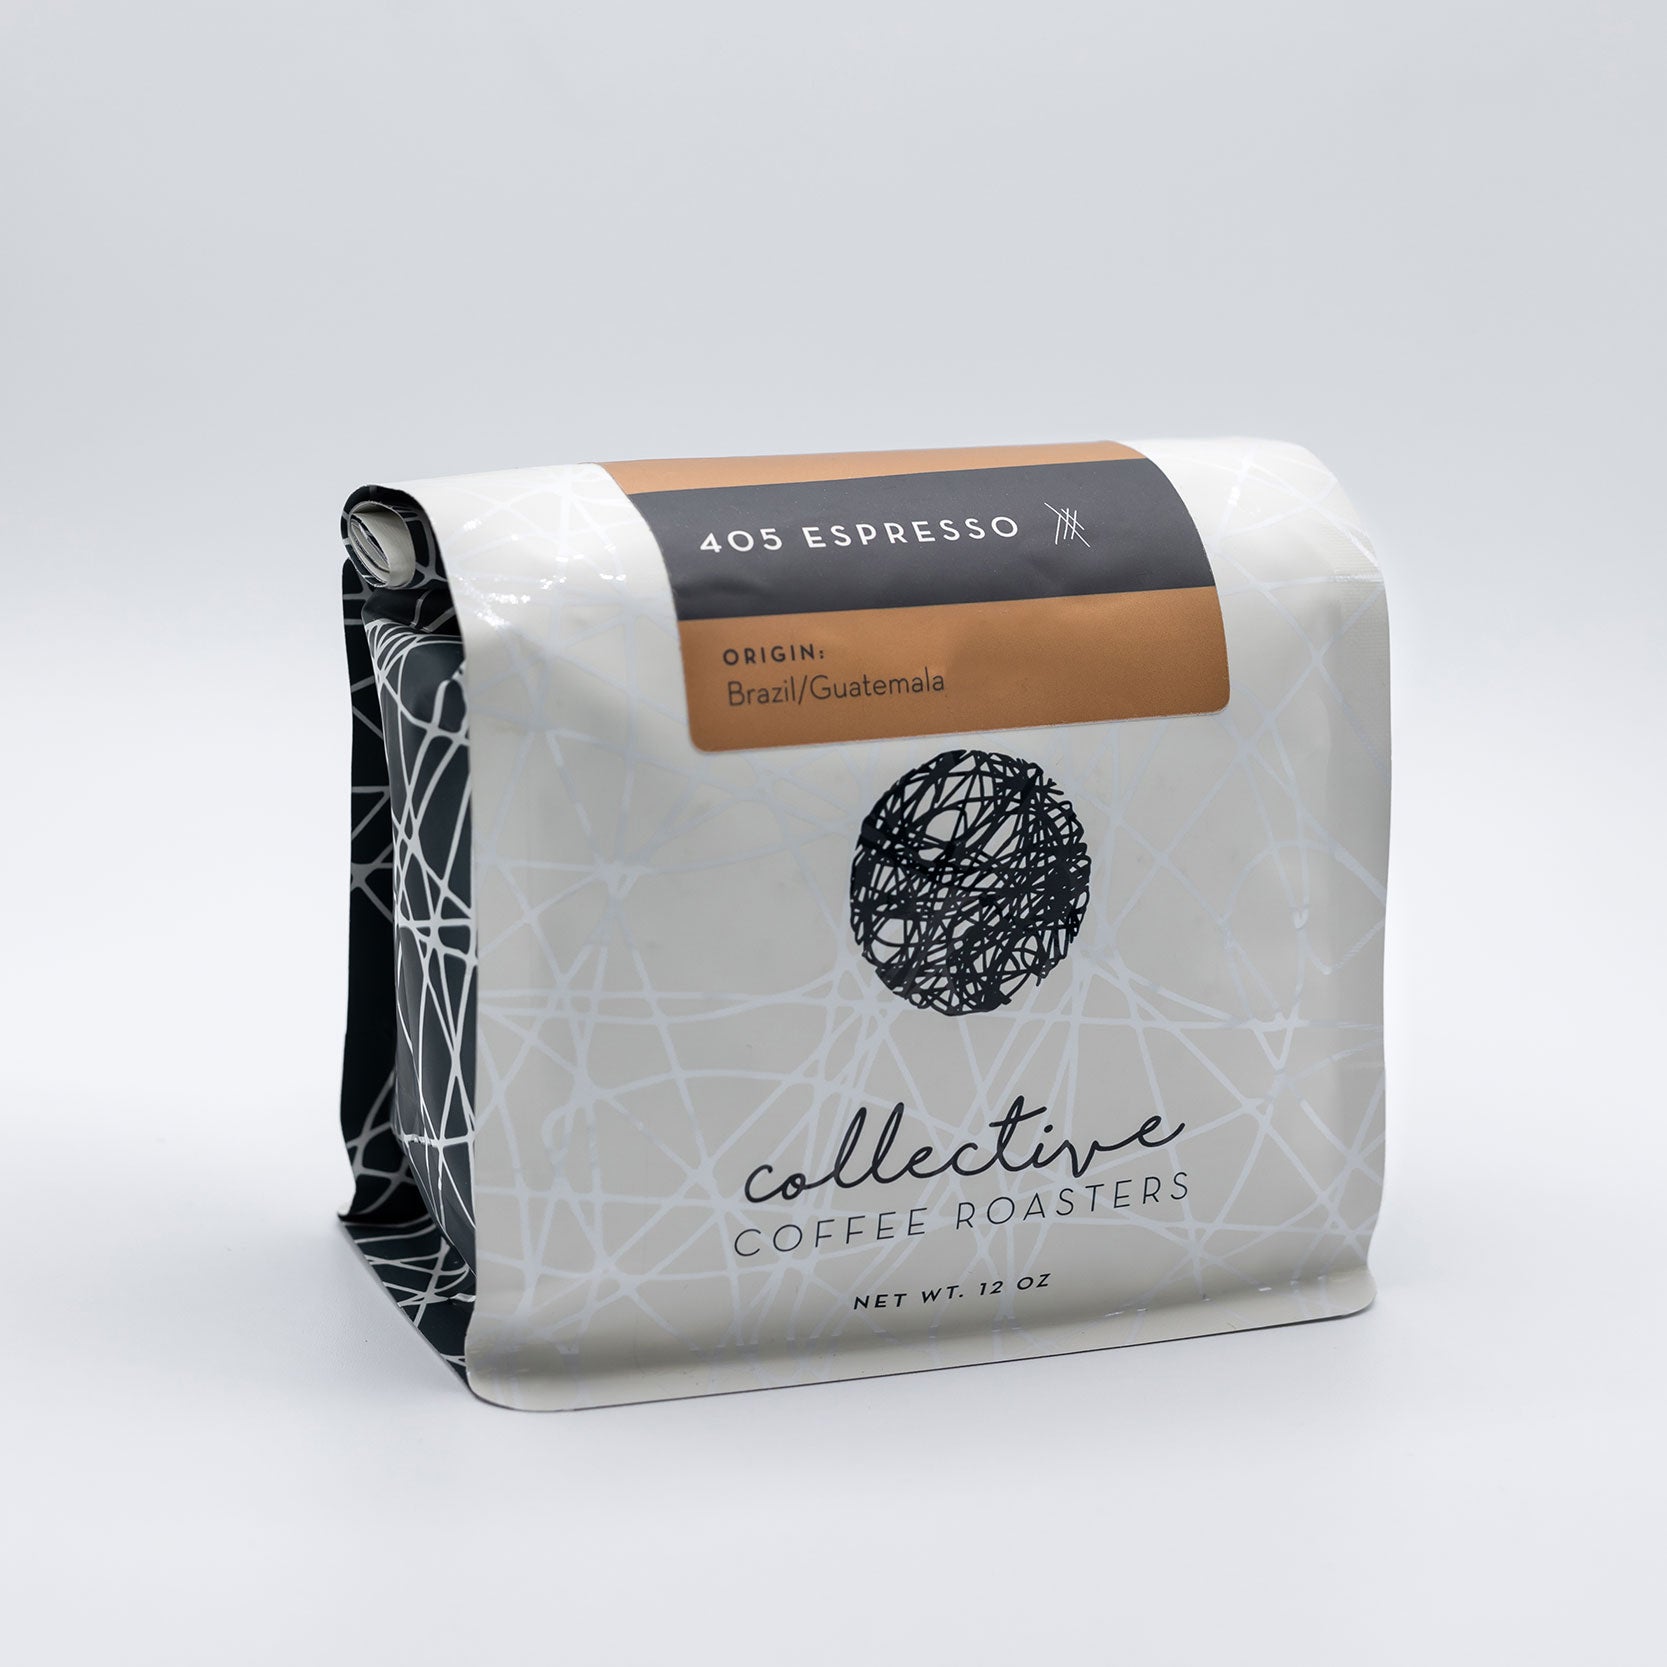 405 Espresso405 EspressoCollective Coffee RoastersStep into the world of refined coffee craftsmanship with our 405 Espresso. Inspired by our humble beginnings, 405 blend has evolved far beyond our address. It's a sy